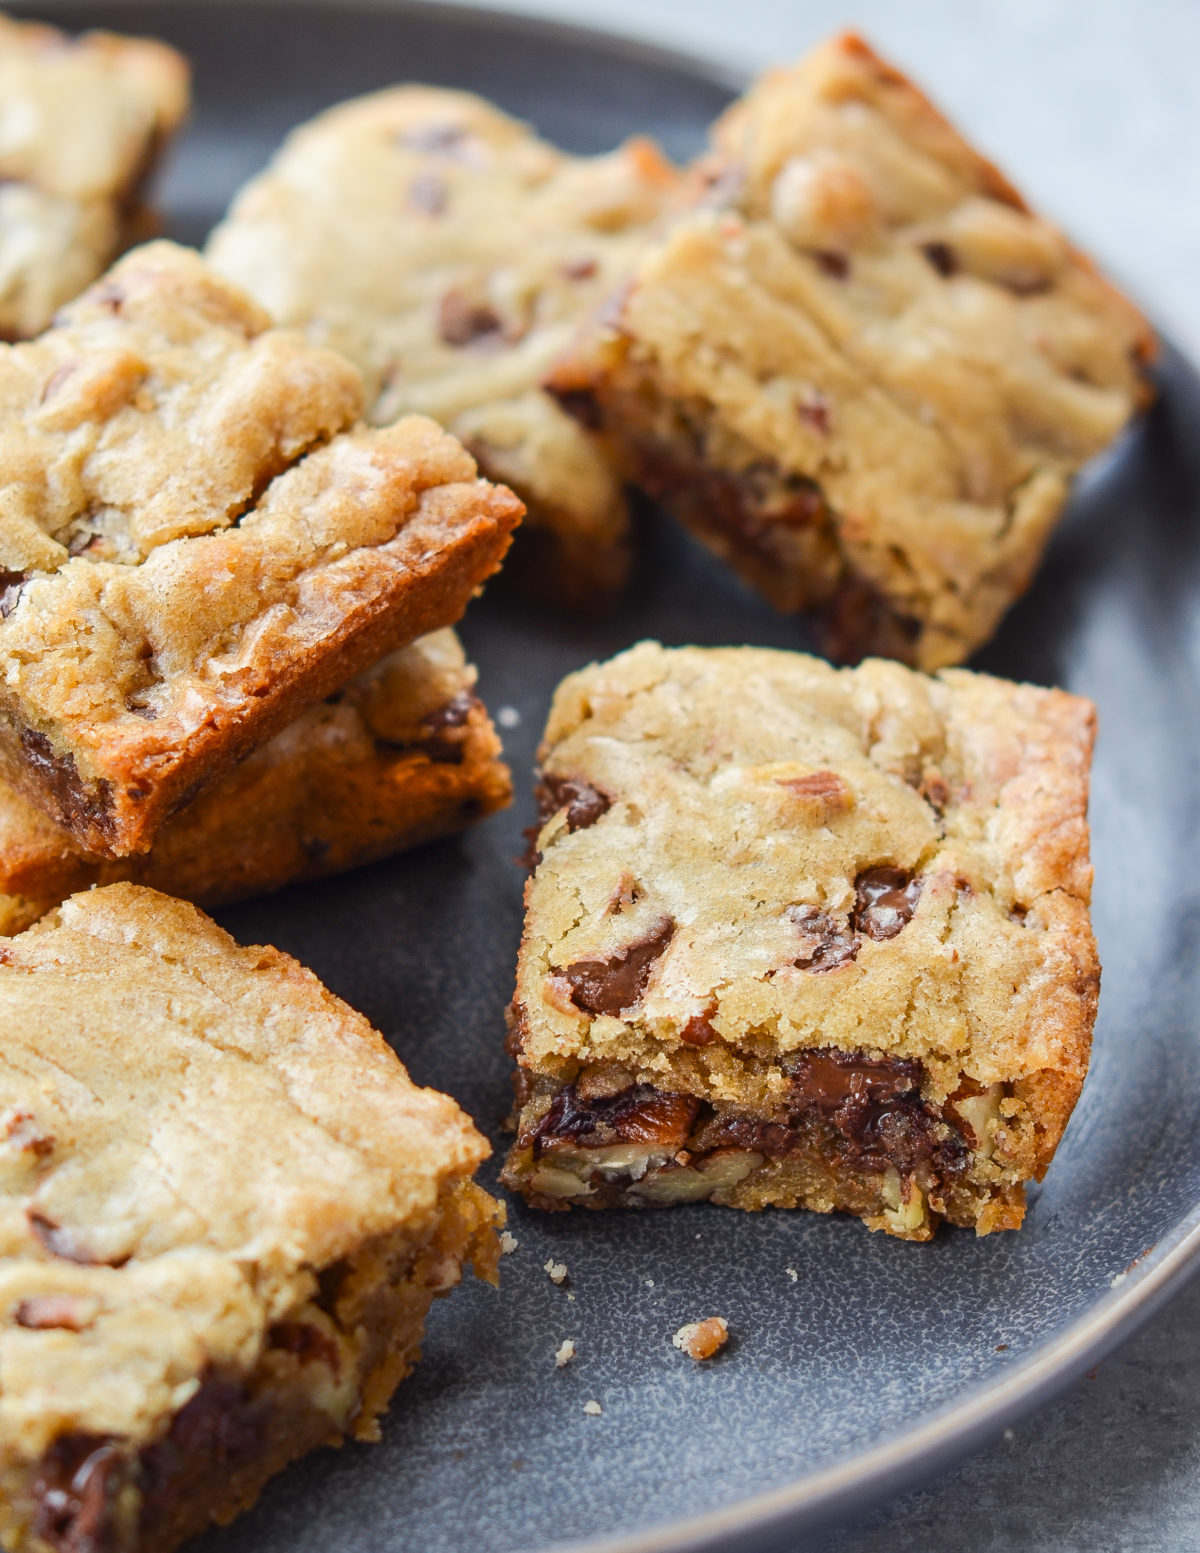 Chocolate chip pecan blondies on a plate.